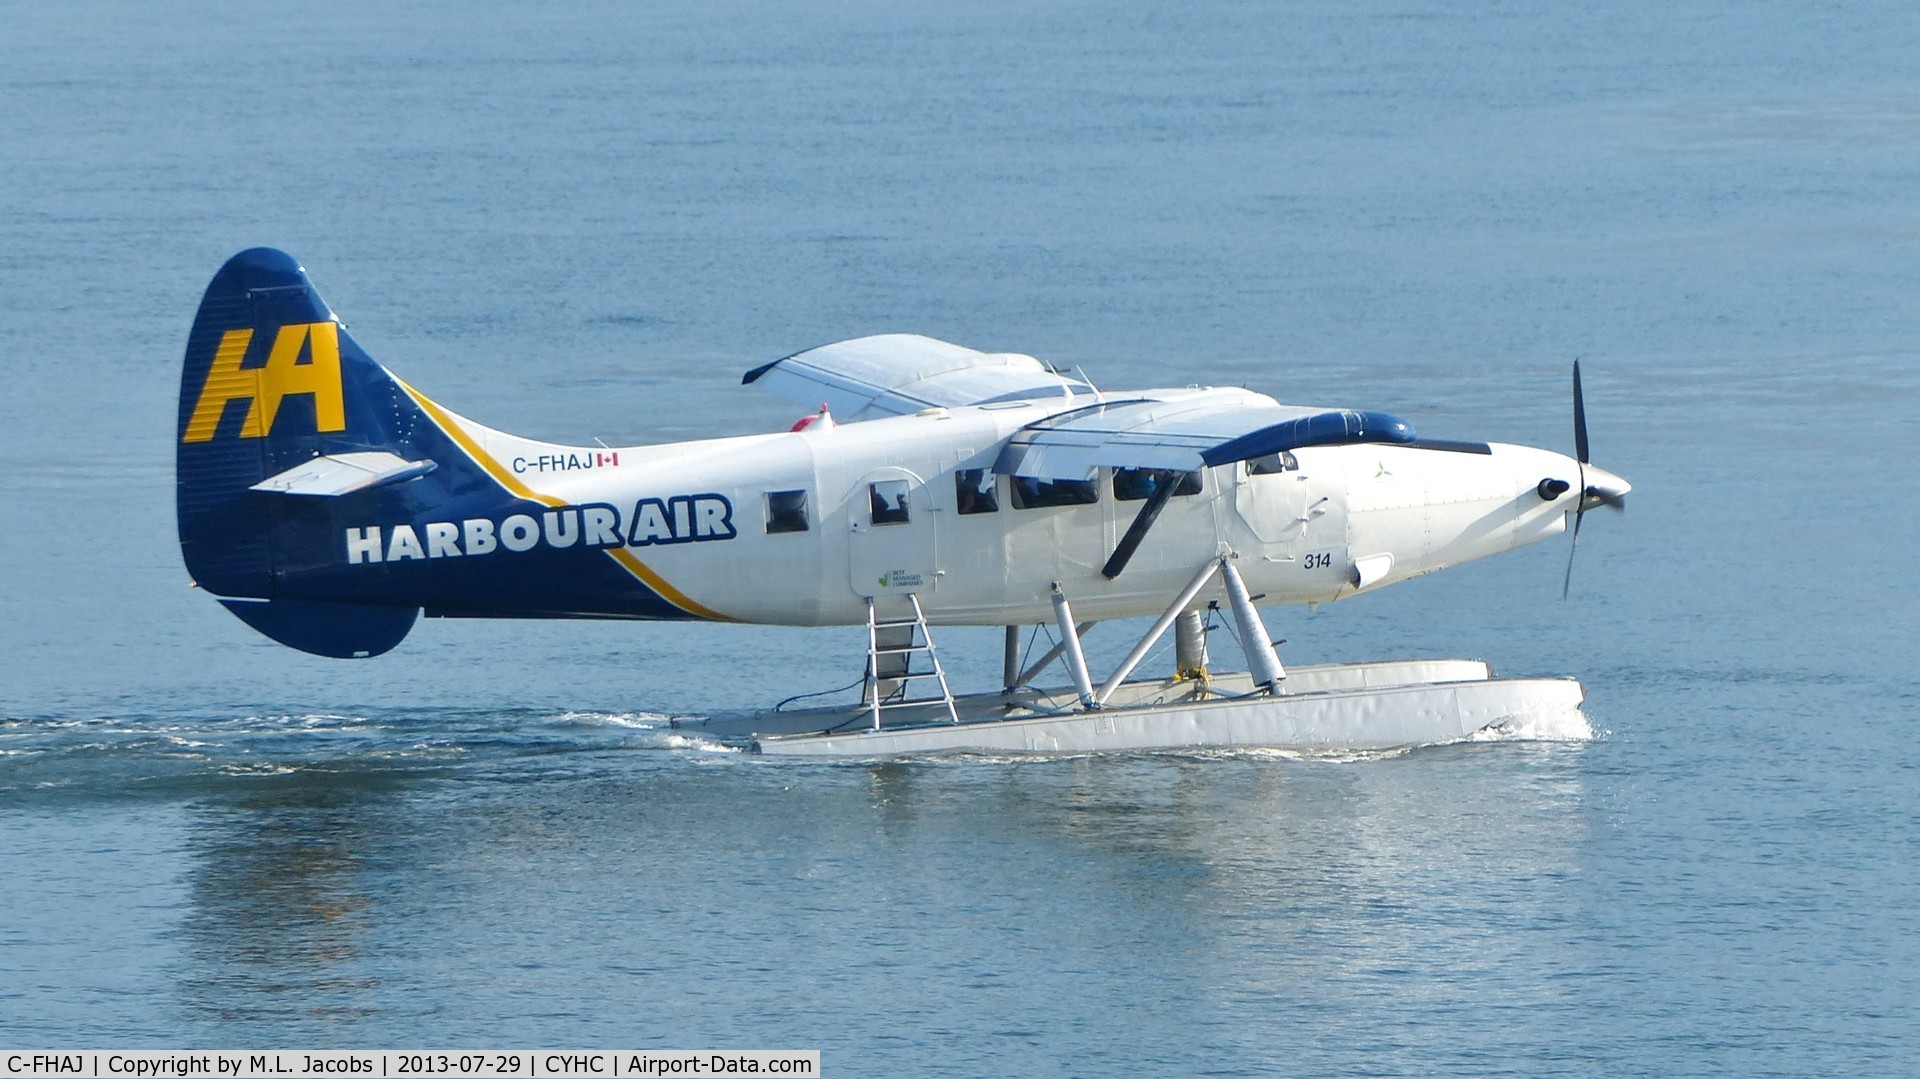 C-FHAJ, 2001 De Havilland Canada DHC-3 Otter C/N 408, Harbour Air #314 taxiing to takeoff position in Coal Harbour.